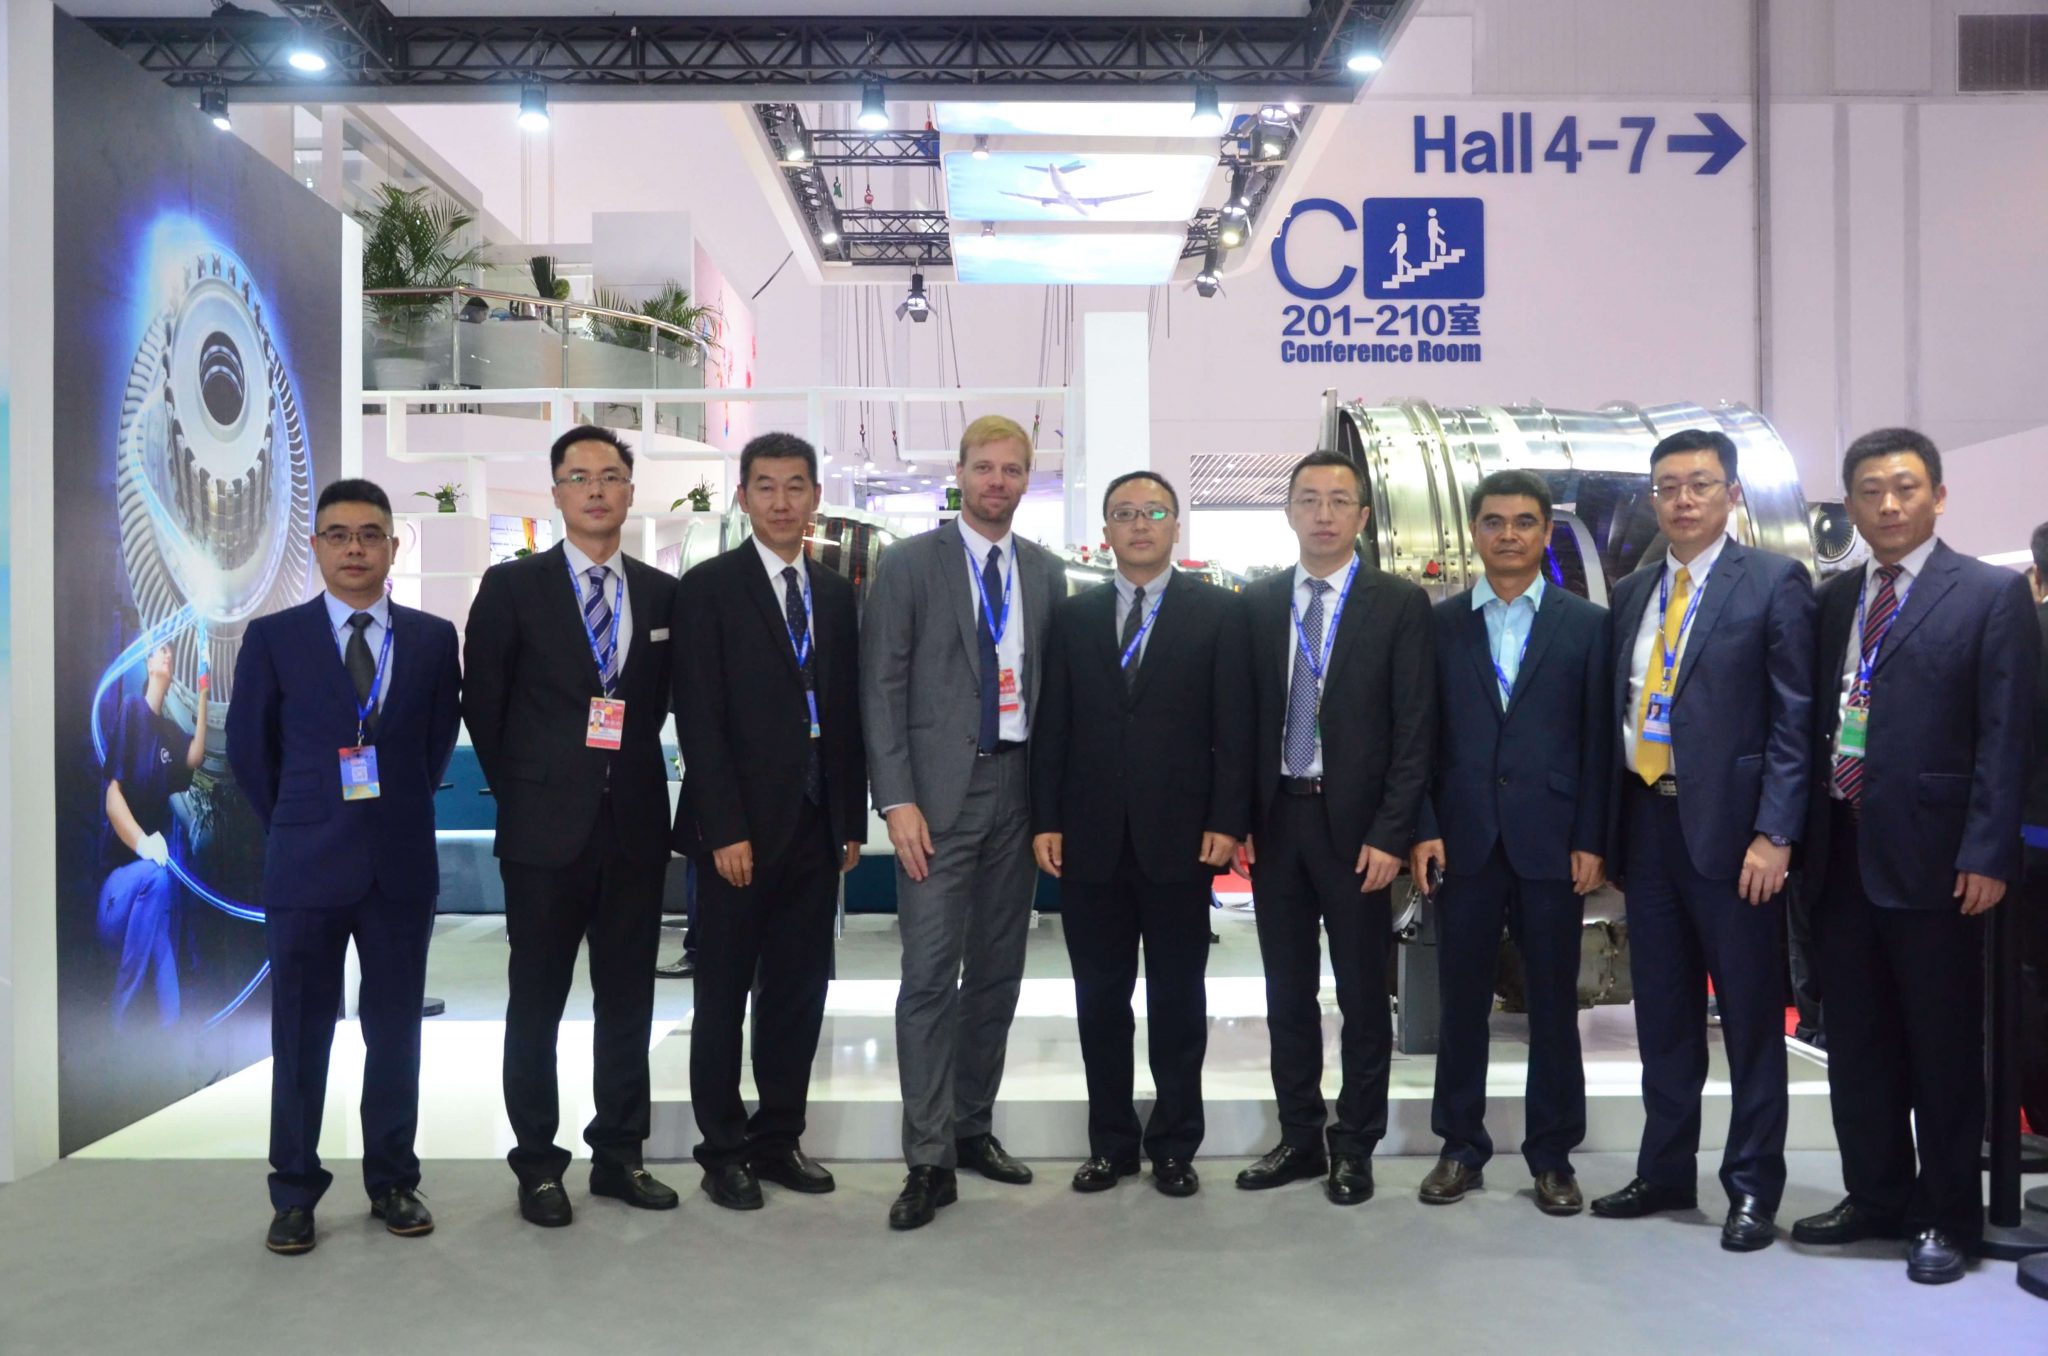 MTU Maintenance signs multiple contracts at Zhuhai Airshow